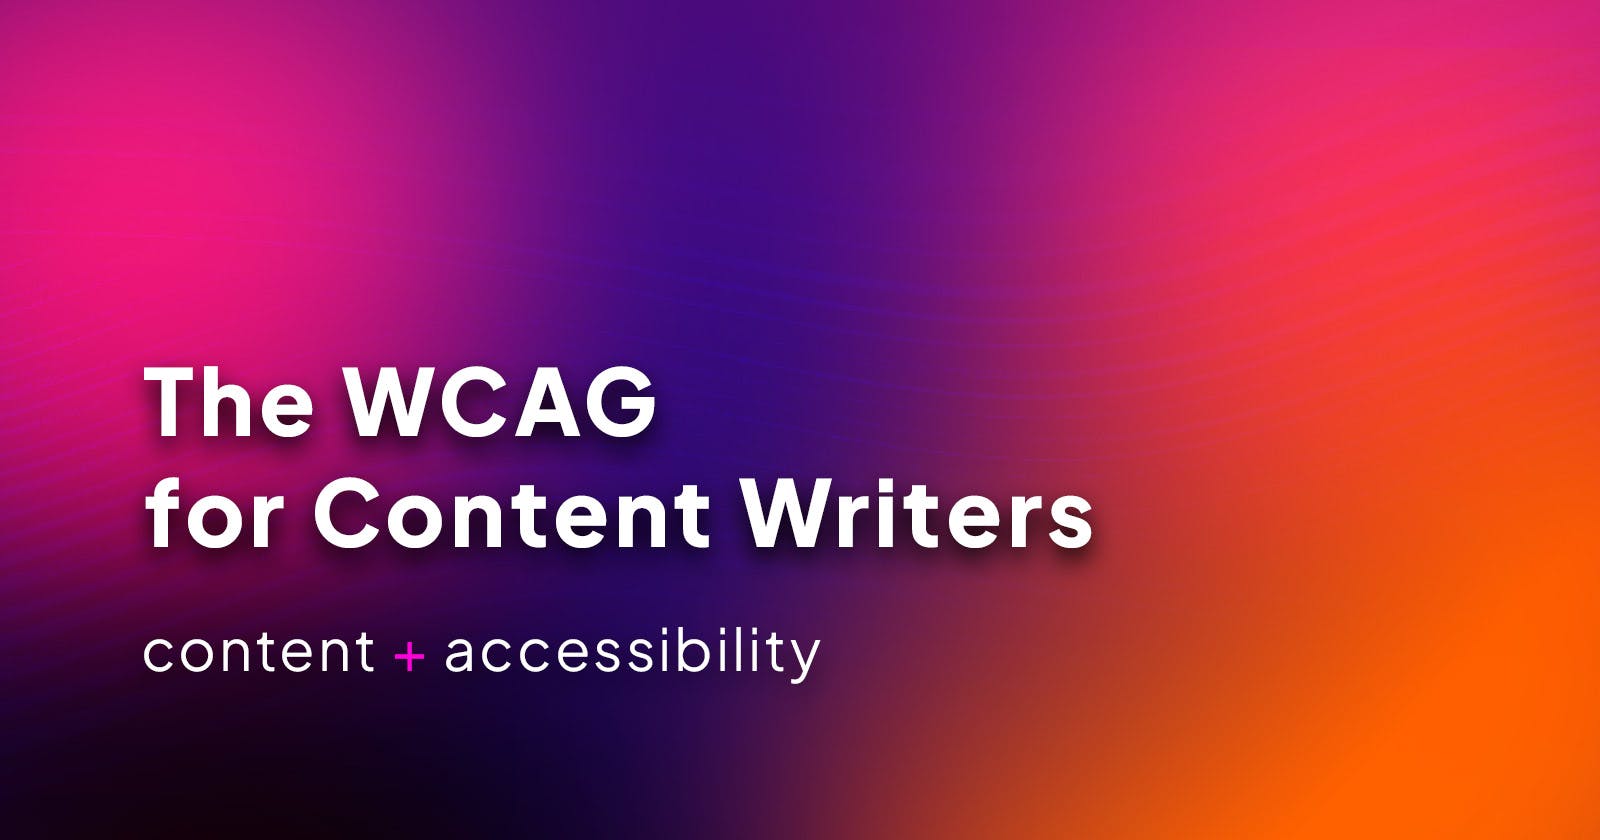 The WCAG for Content Writers